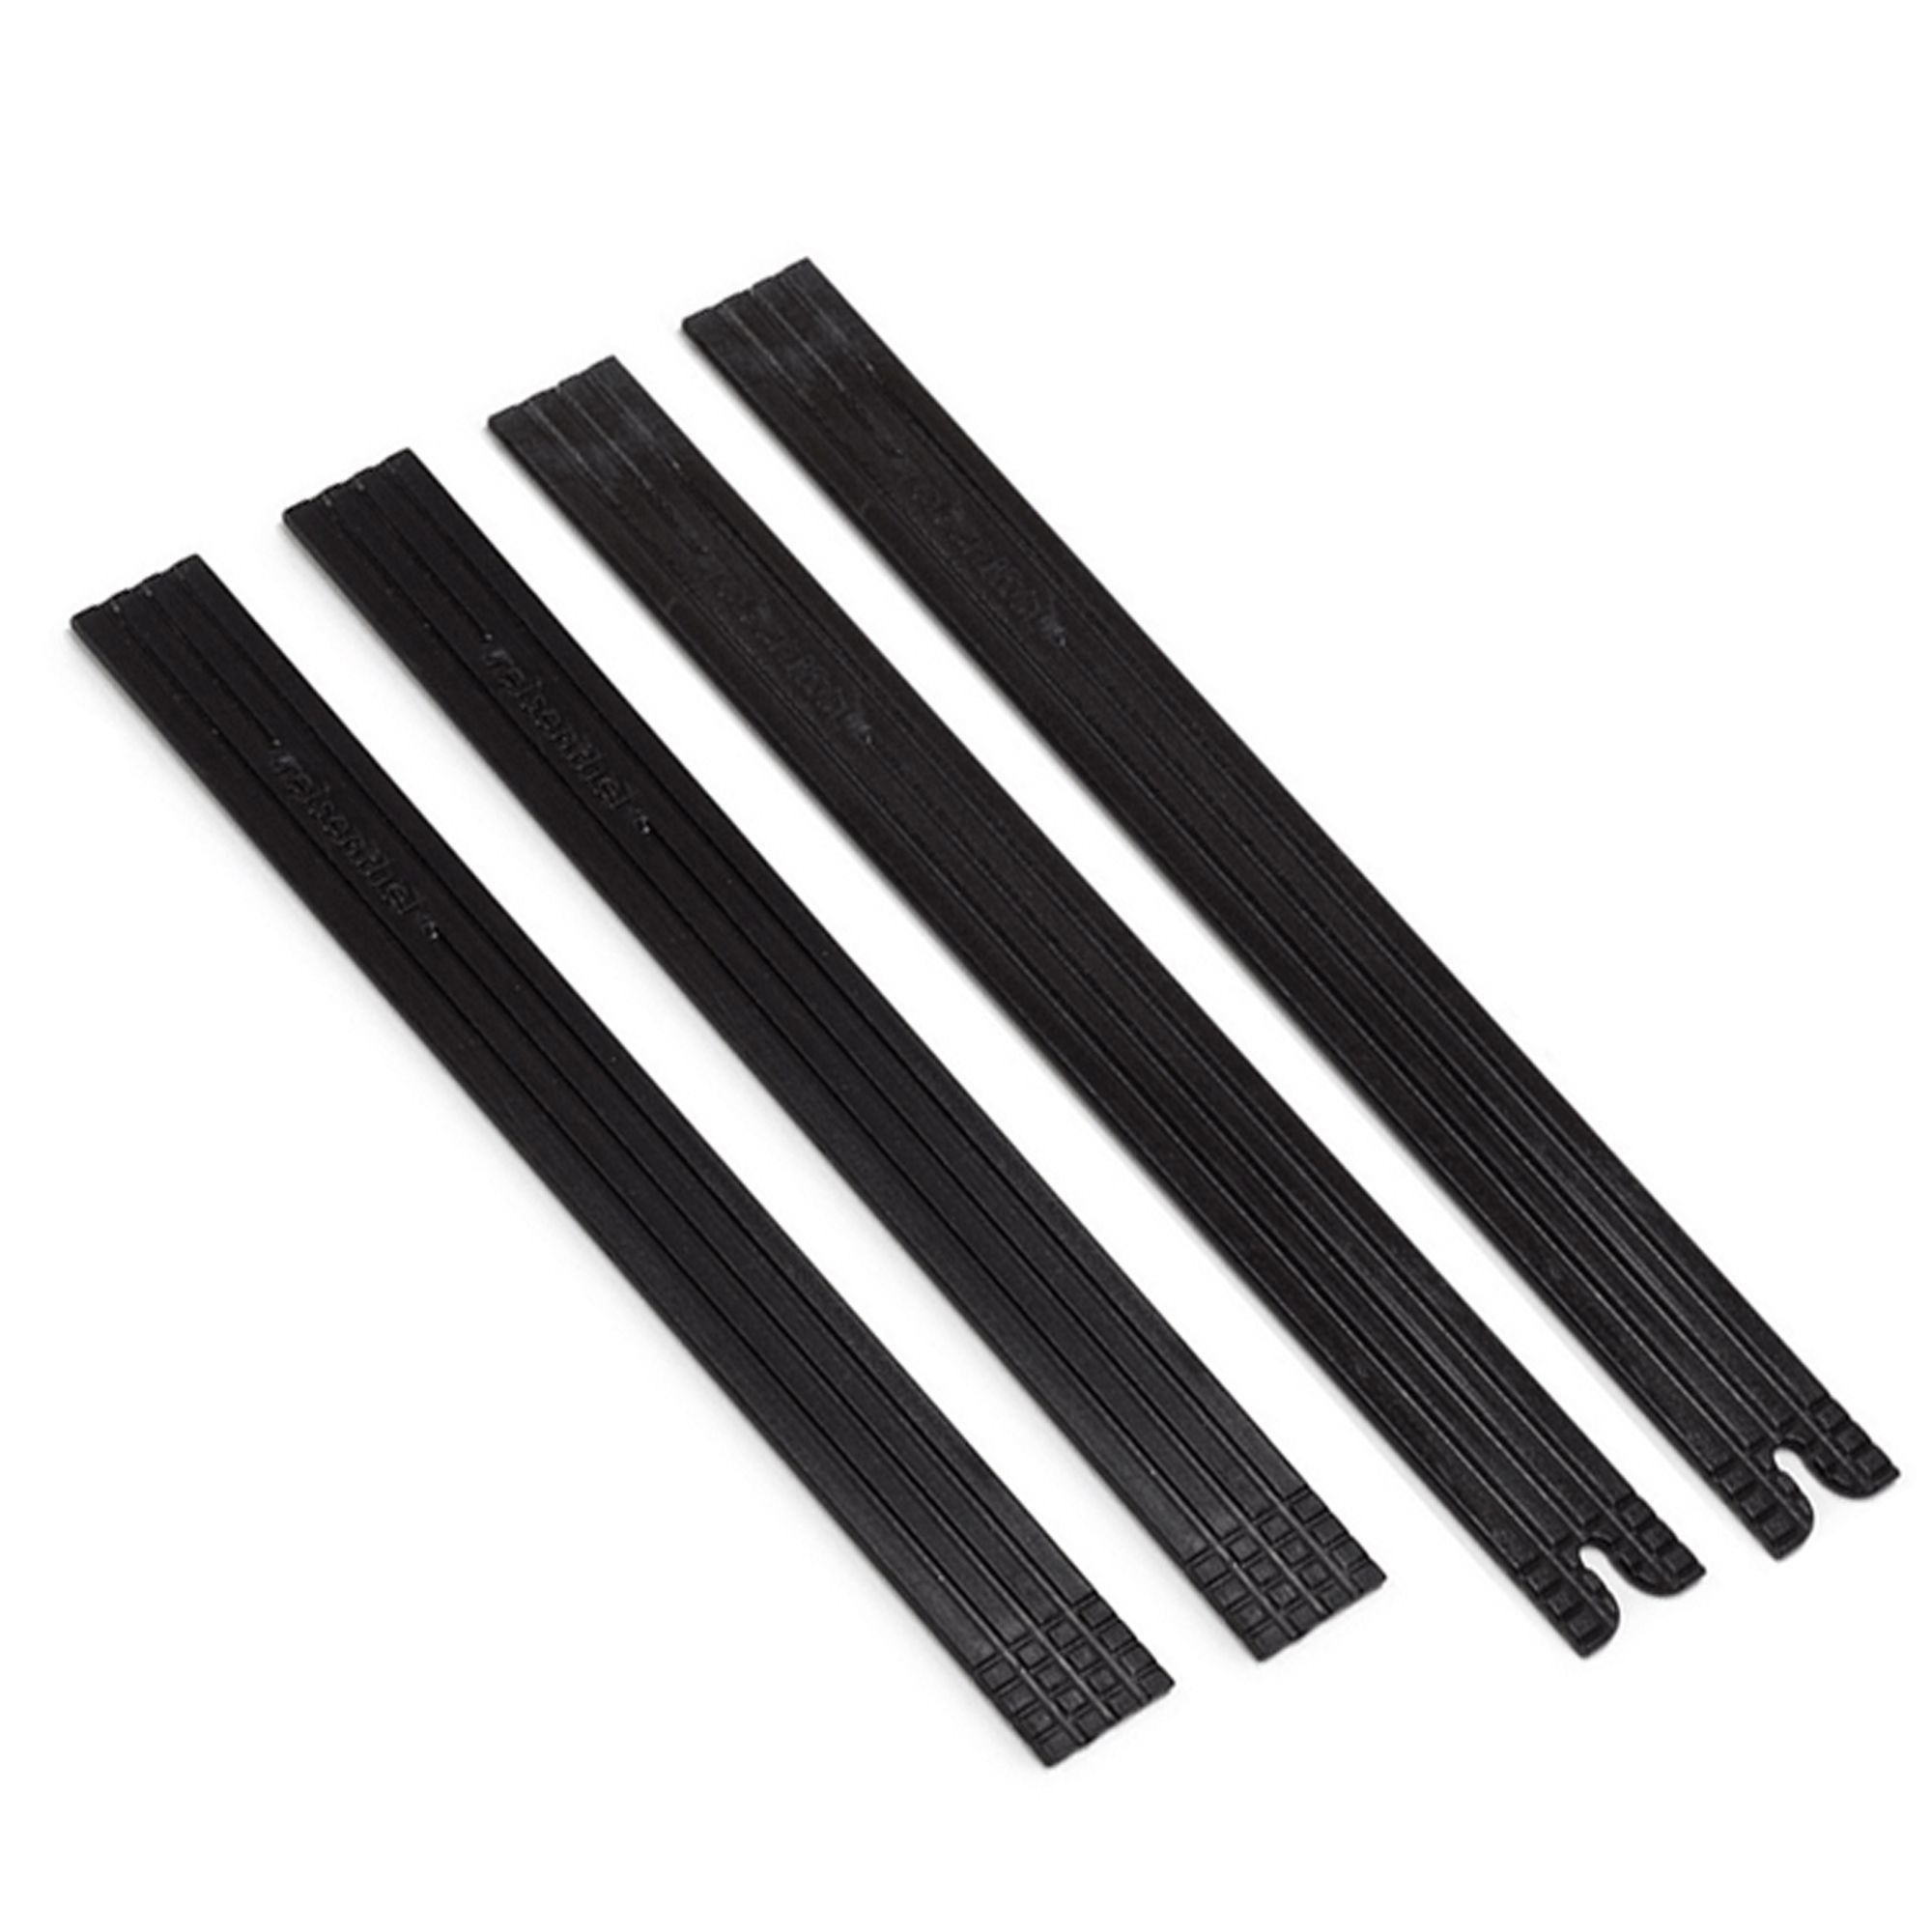 reisenthel - replacement struts for carrybag Set of 4